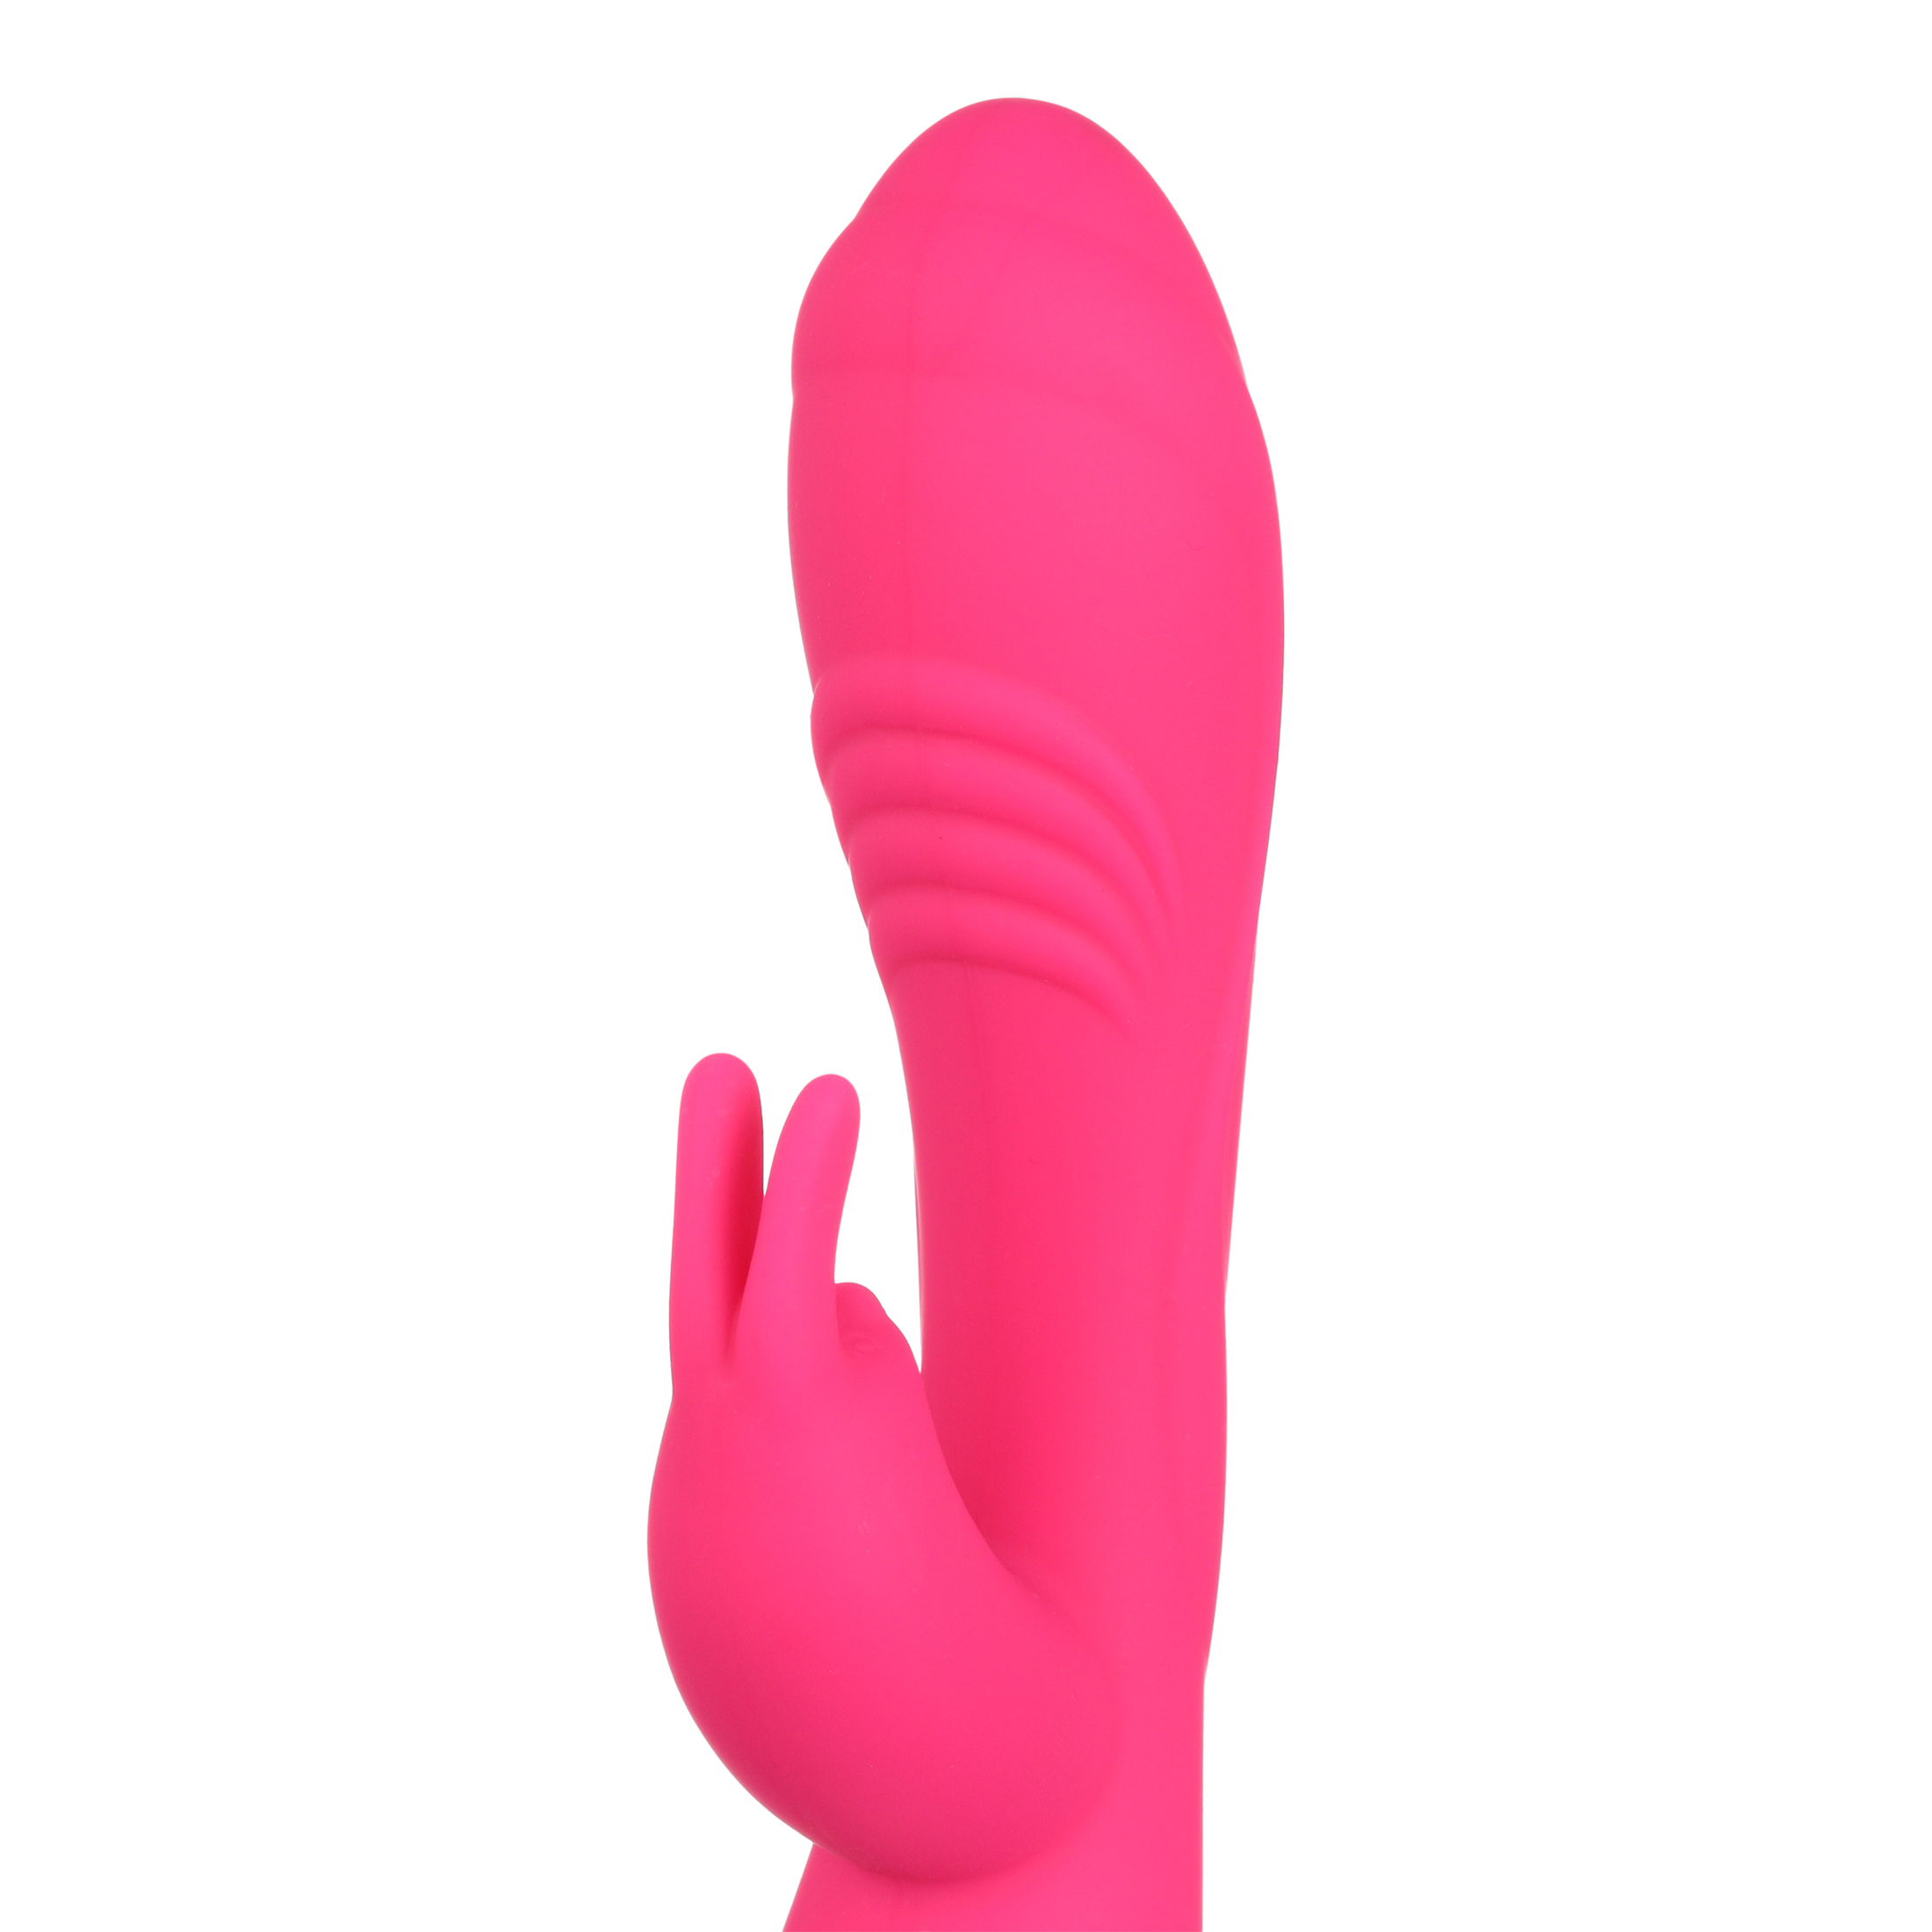 Rabbit Lily Vibrator Dual Pleasure G-Spot and Clitoral Waterproof Stimulator by Better Love - image 4 of 5